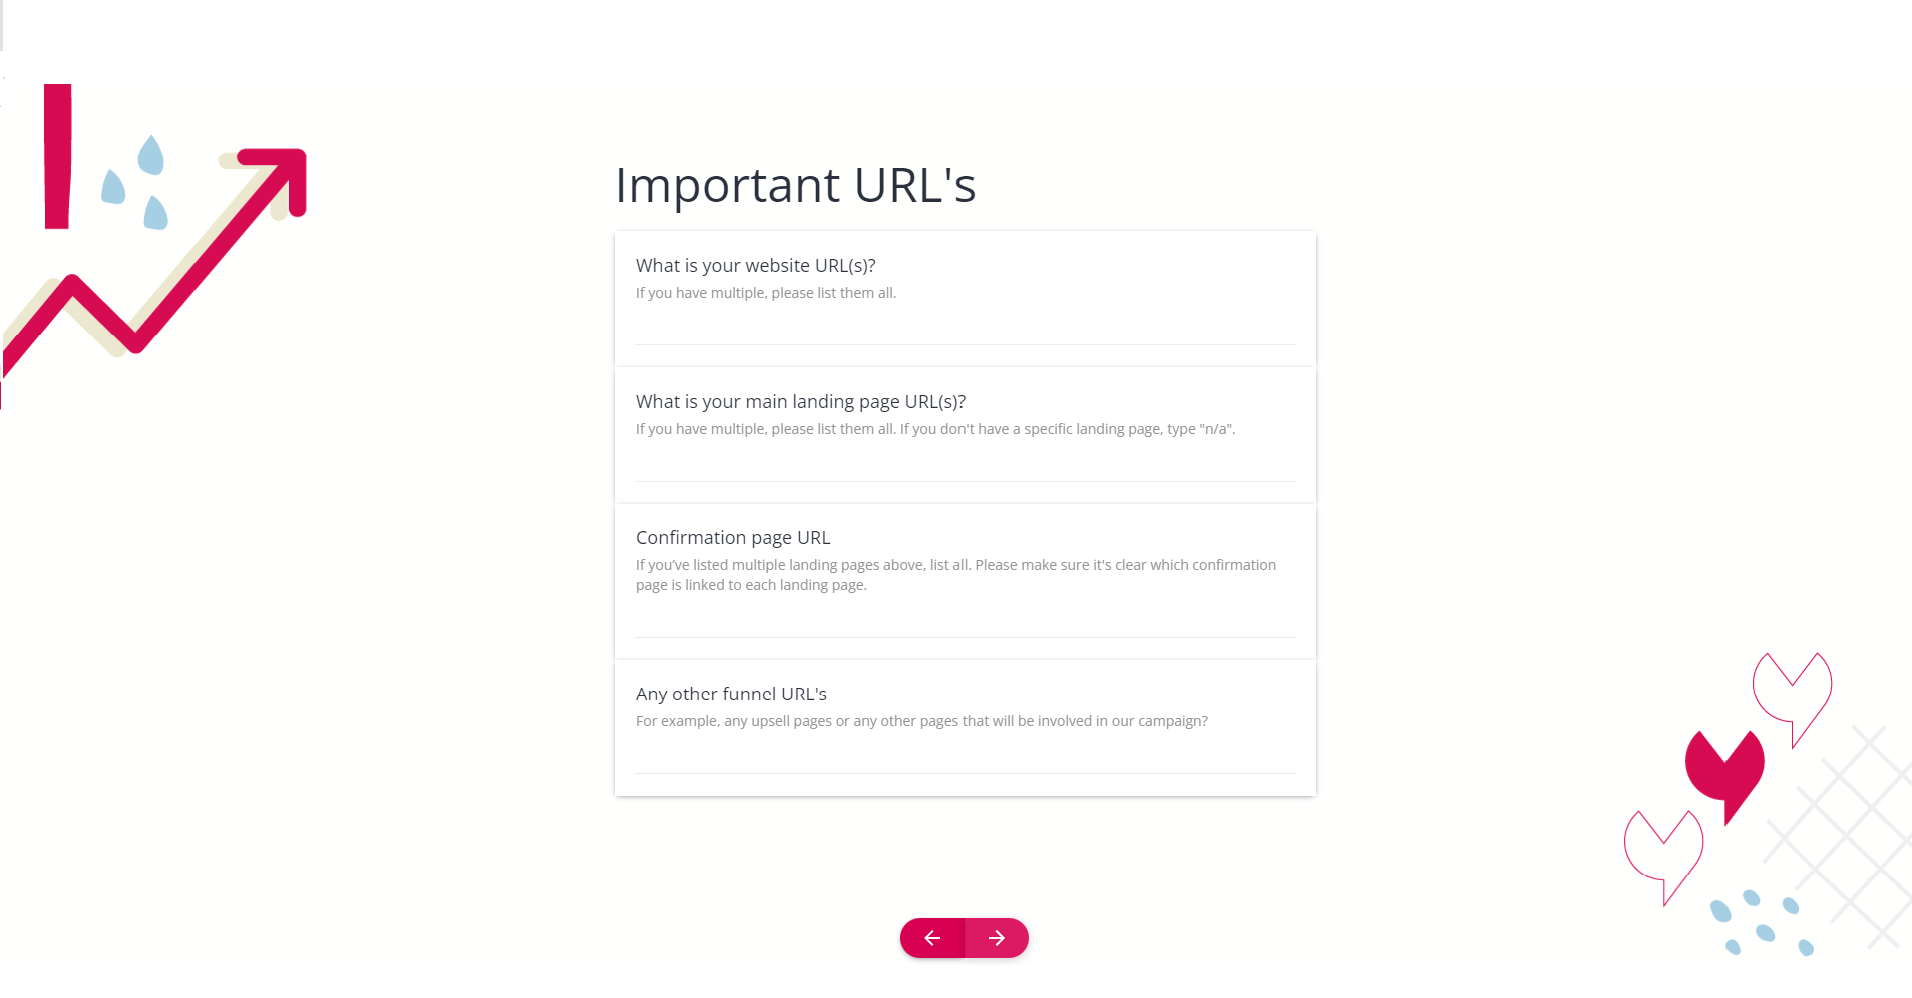 Yatter onboarding form - Important URLs section